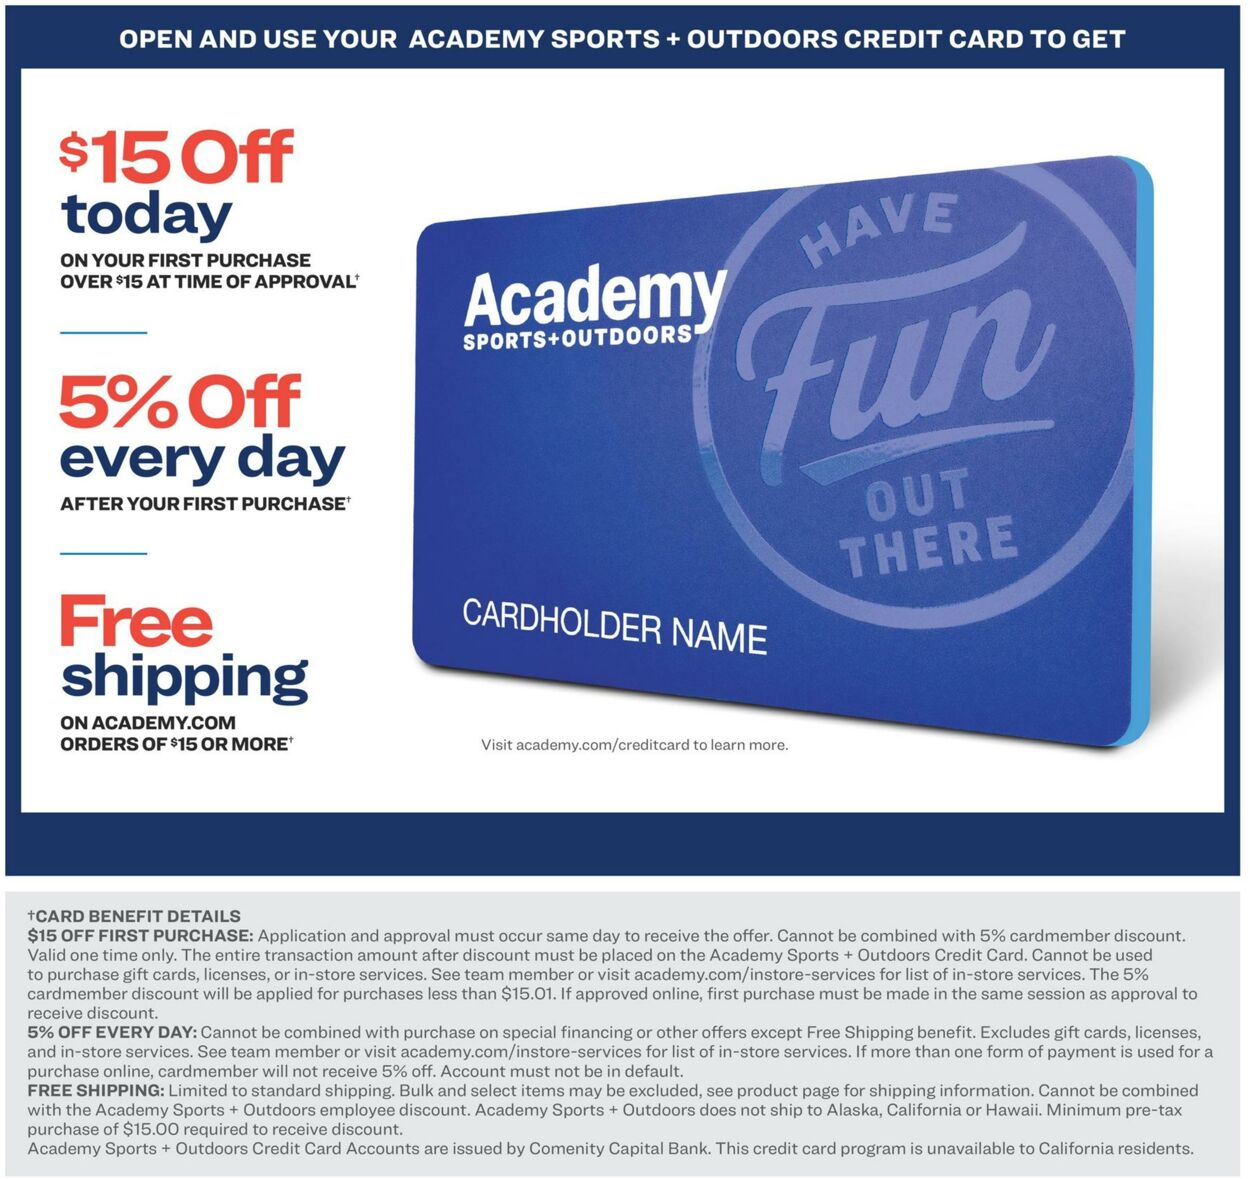 Weekly ad Academy Sports 05/15/2023 - 05/29/2023